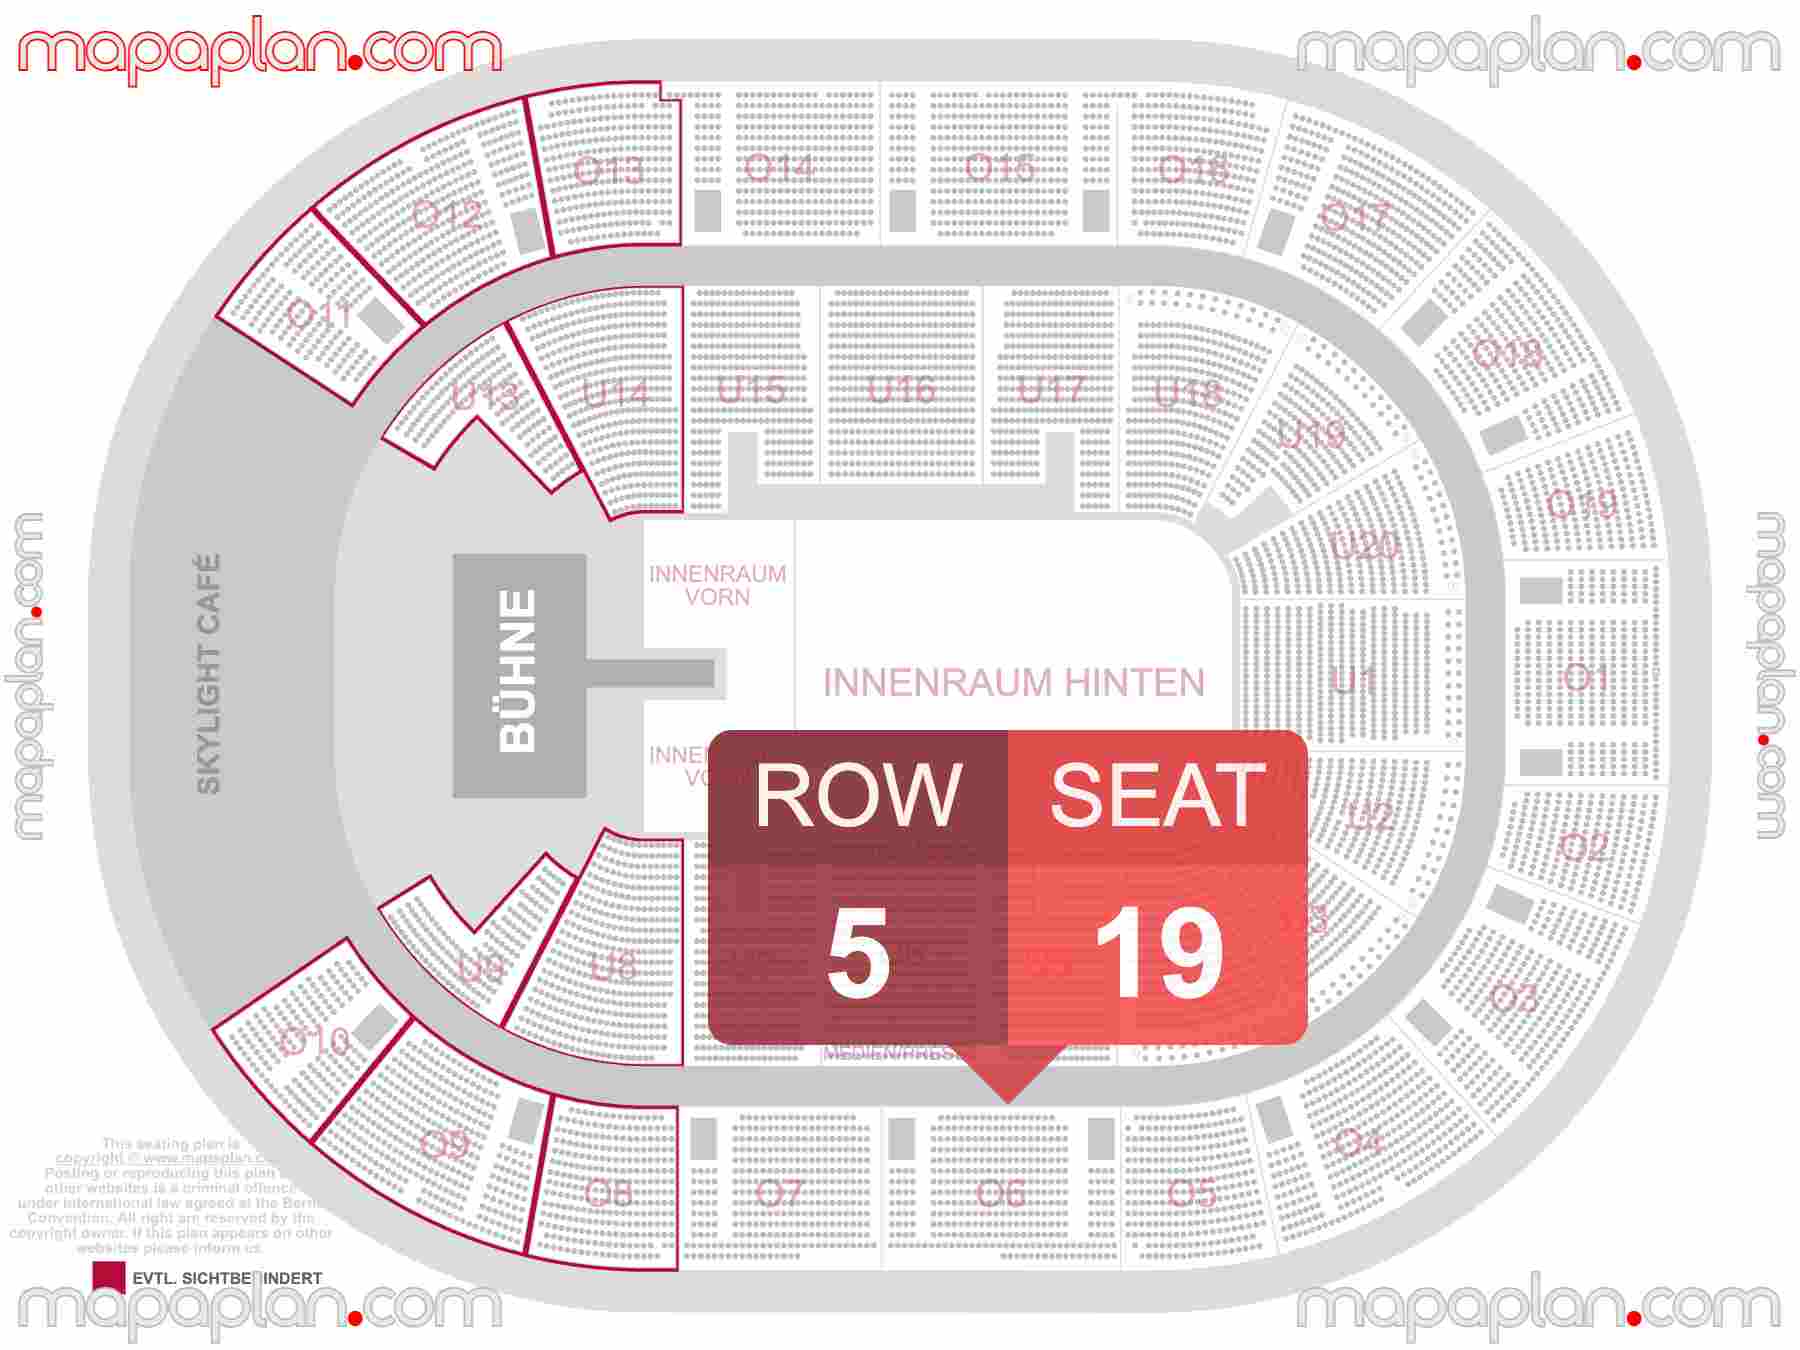 Hamburg Barclays Arena seating plan Concert with extended catwalk runway B-stage Übersichtsplan mit Innenraum Steh- & Sitzplätze Numerierung & Reihen seating plan with exact section numbers showing best rows and seats selection 3d layout - Best interactive seat finder tool with precise detailed location data